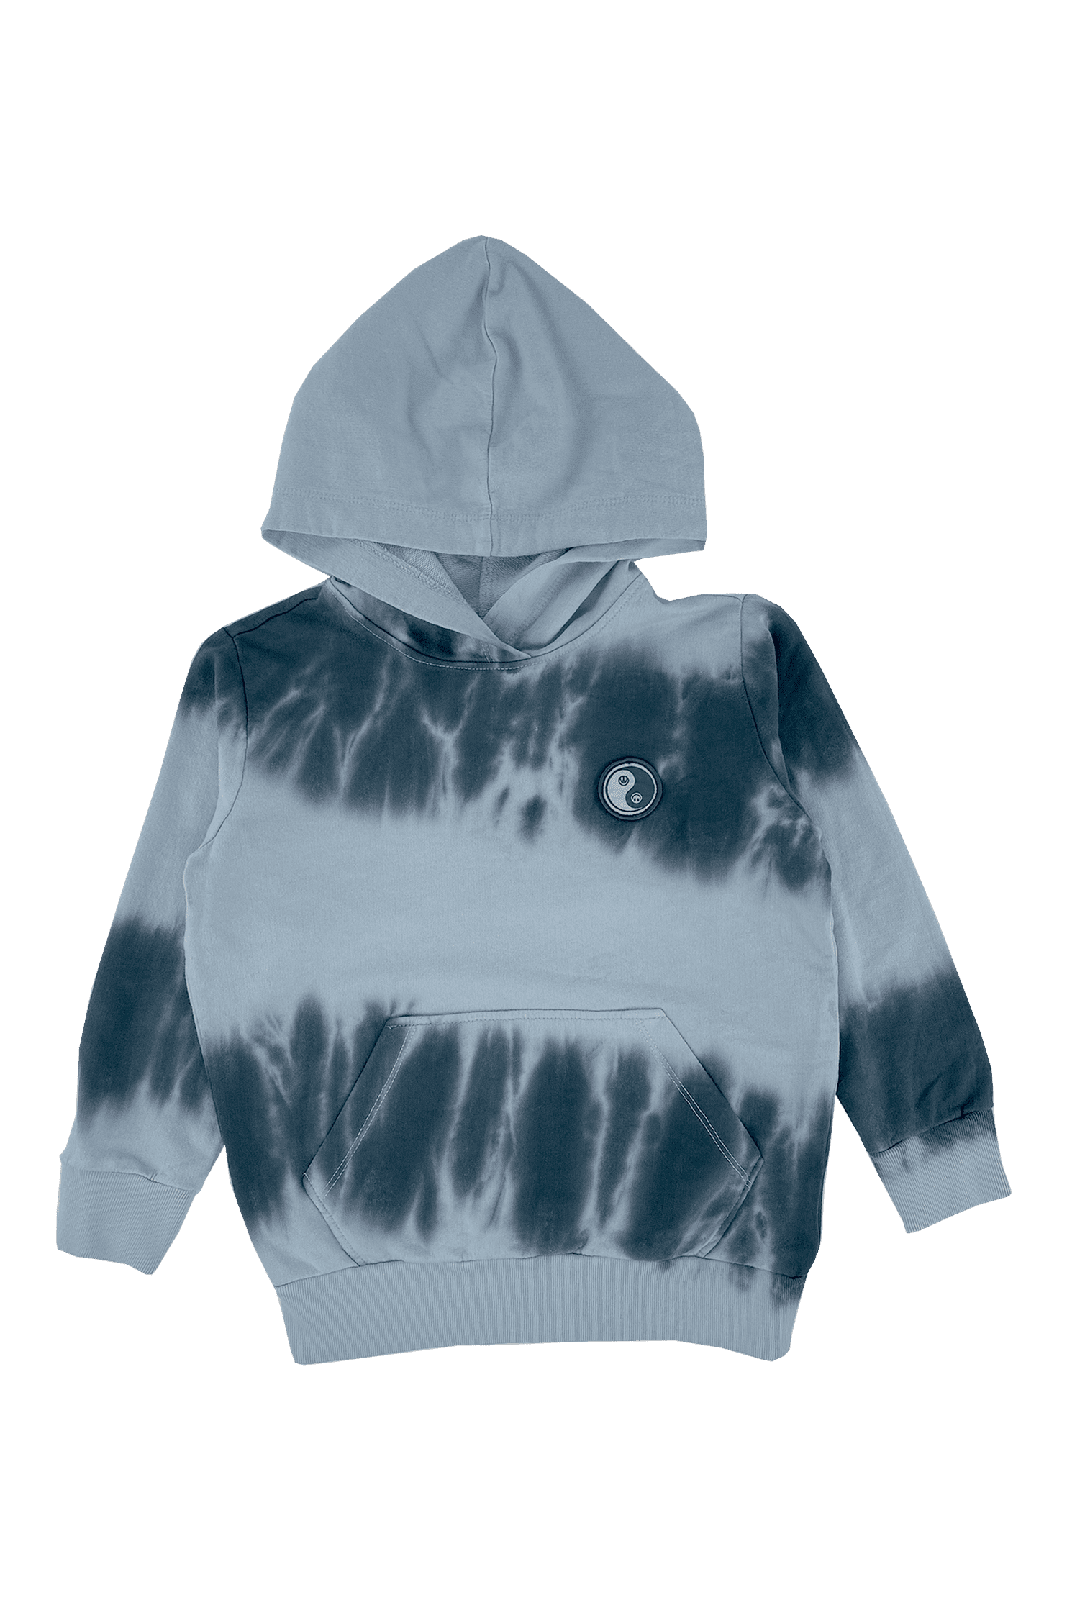 Riptide Hoodie Tea for Three: A Children's Boutique